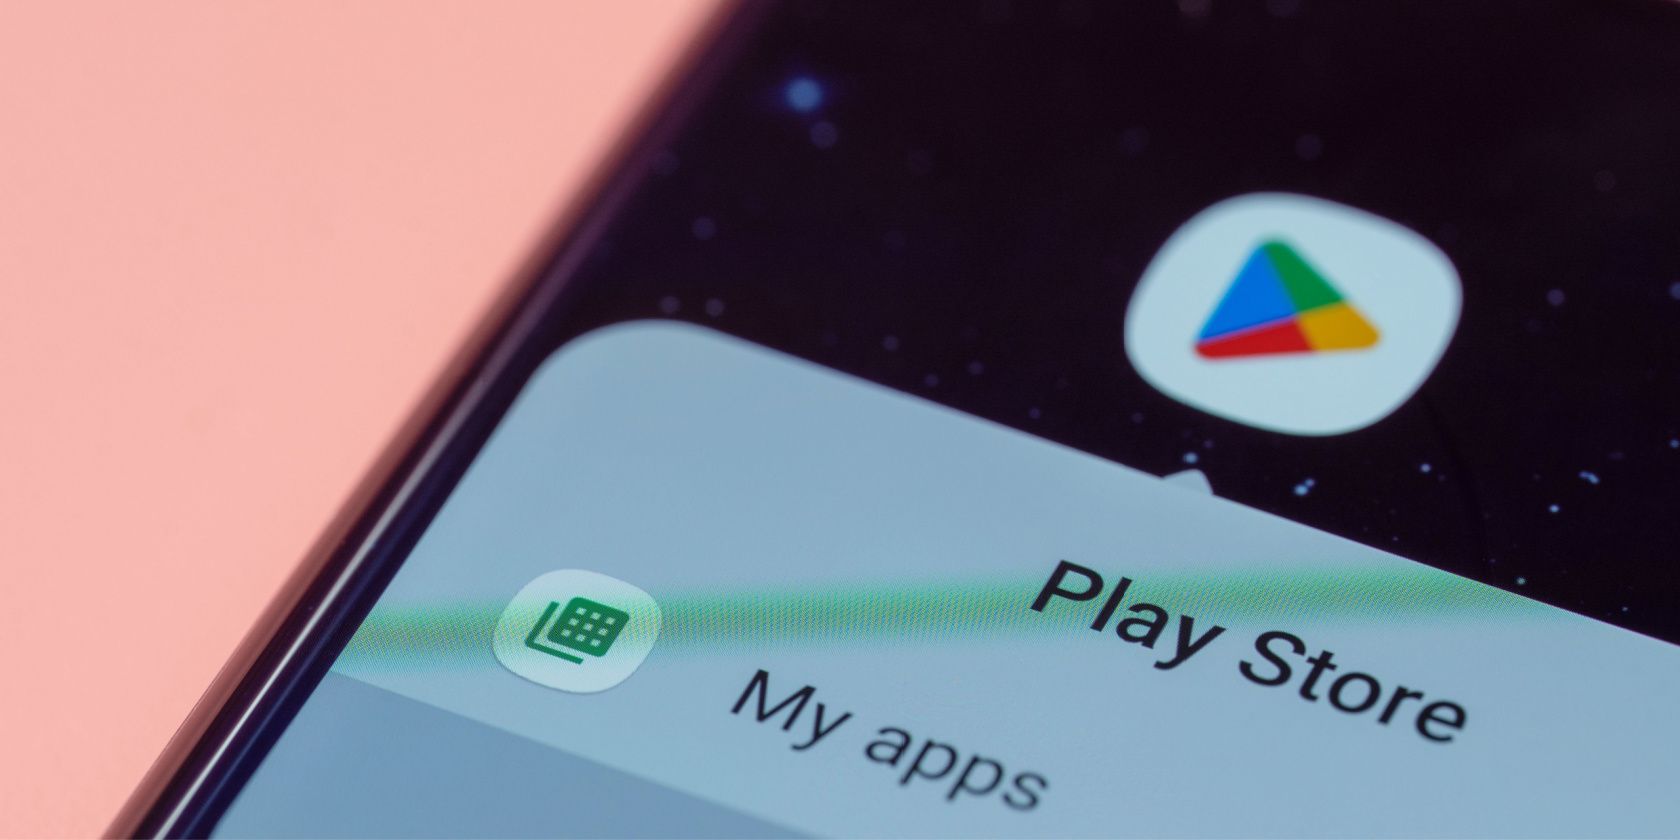 Google Play My Apps Shortcut on Android phone